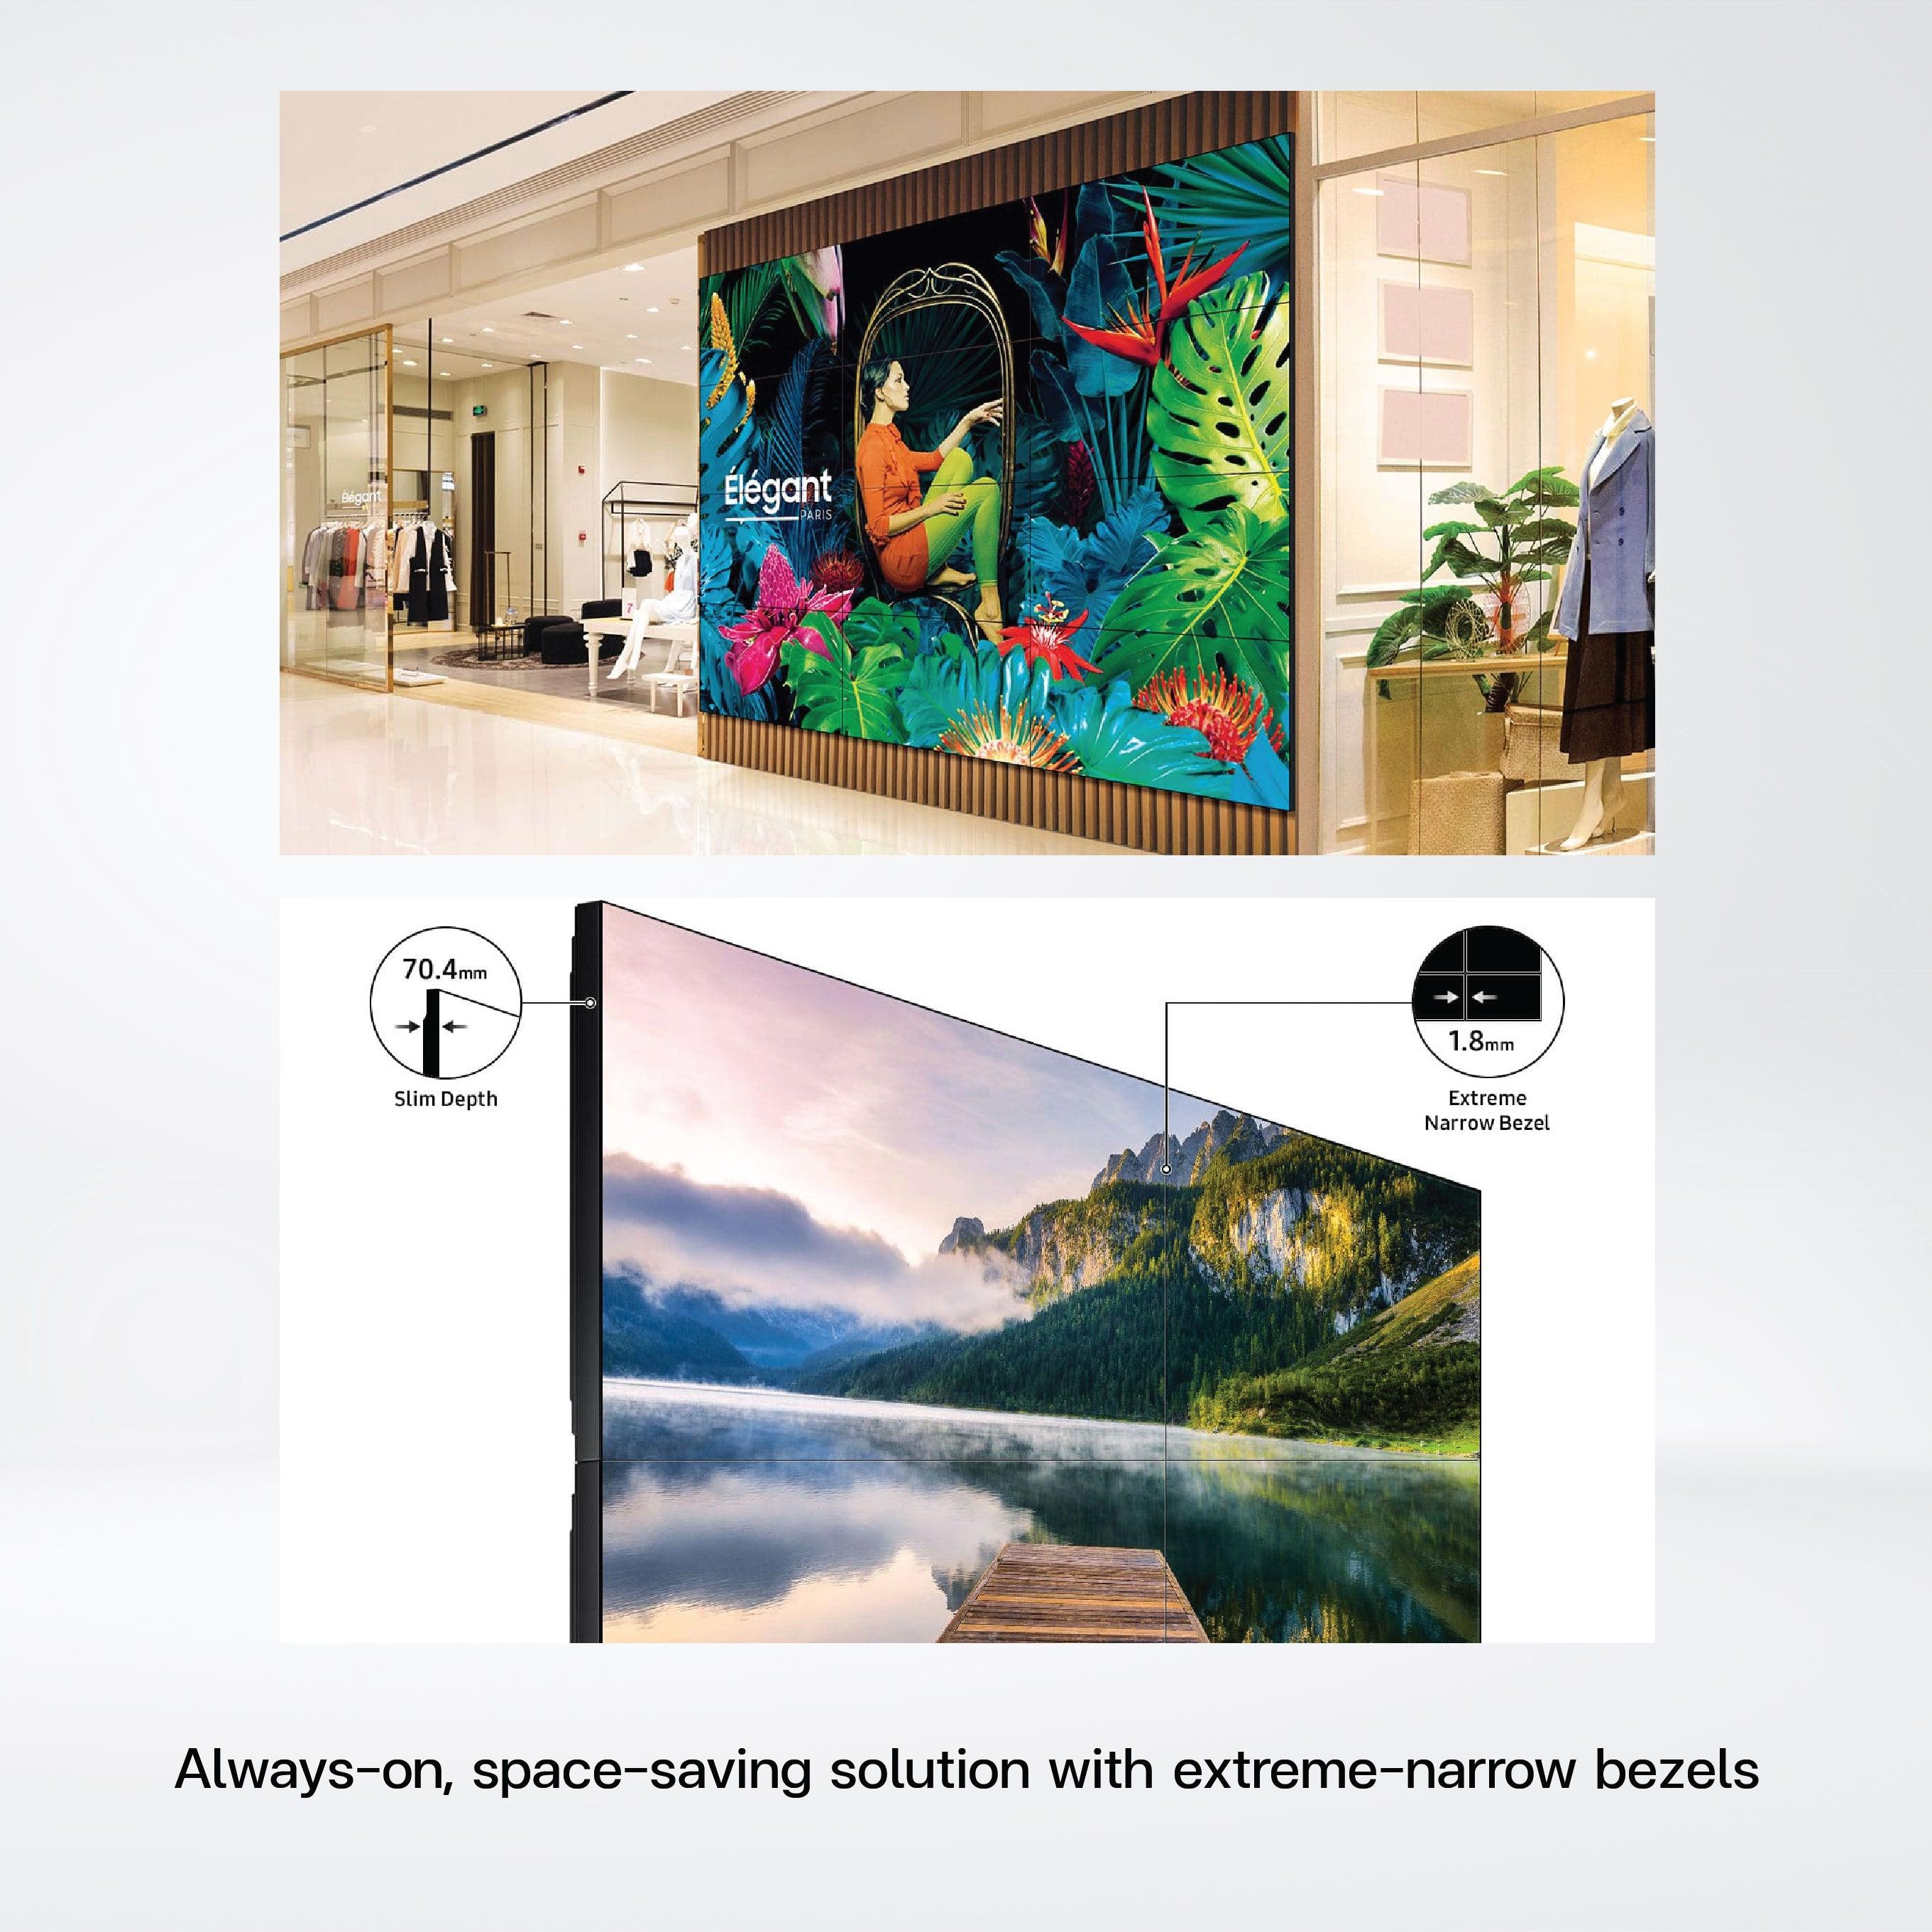 VM55T-E 55" Max 500 nit Always-on, space-saving solution delivering a seamless visual experience - Riverplus